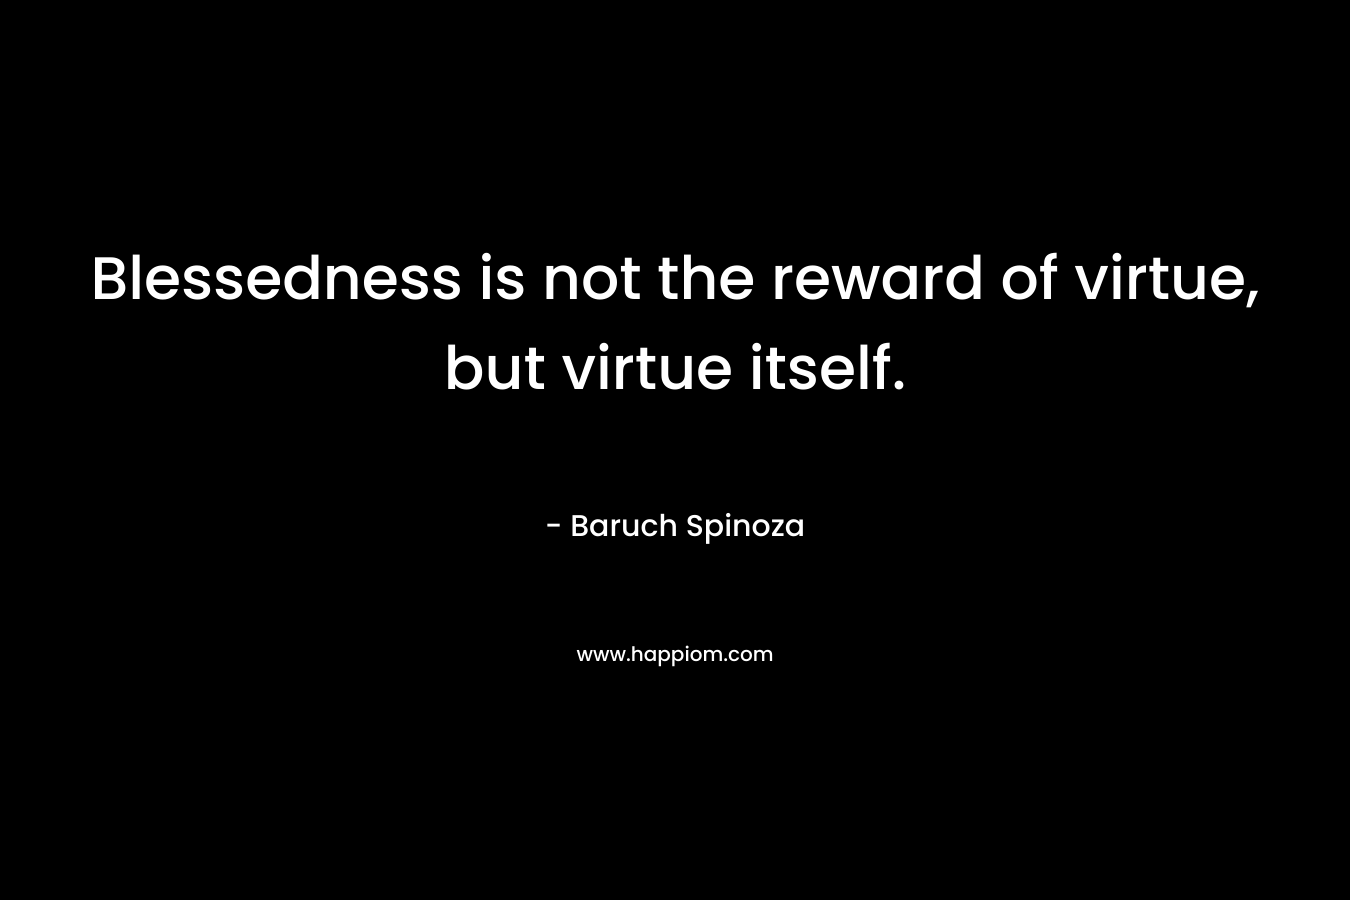 Blessedness is not the reward of virtue, but virtue itself.